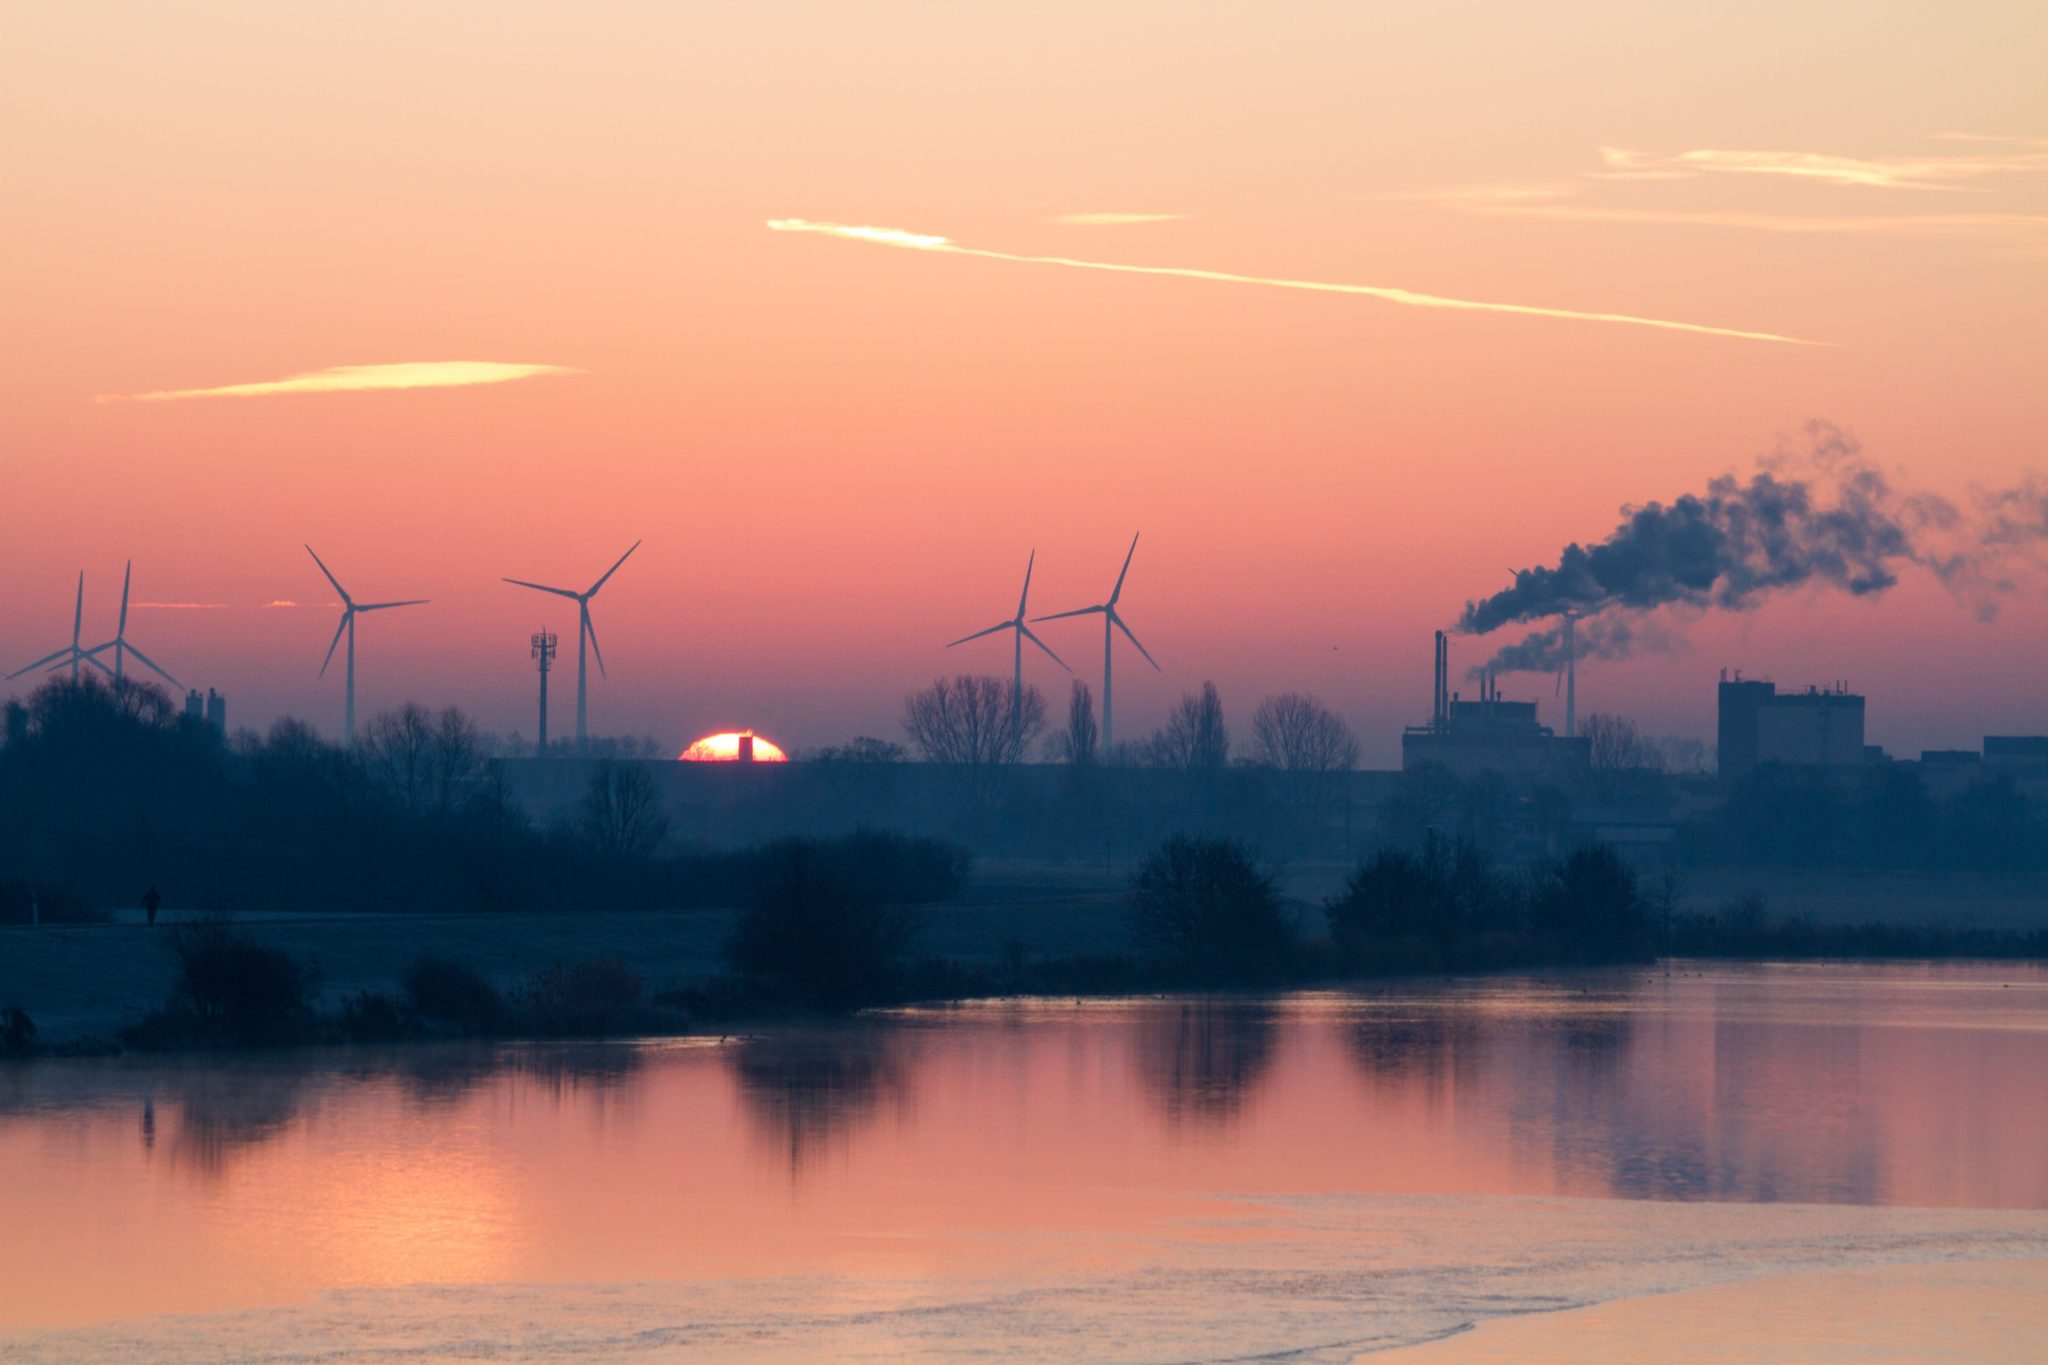 Sunrise behind wind turbines and a smoke stack with in Bremen, Germany in January 2019.